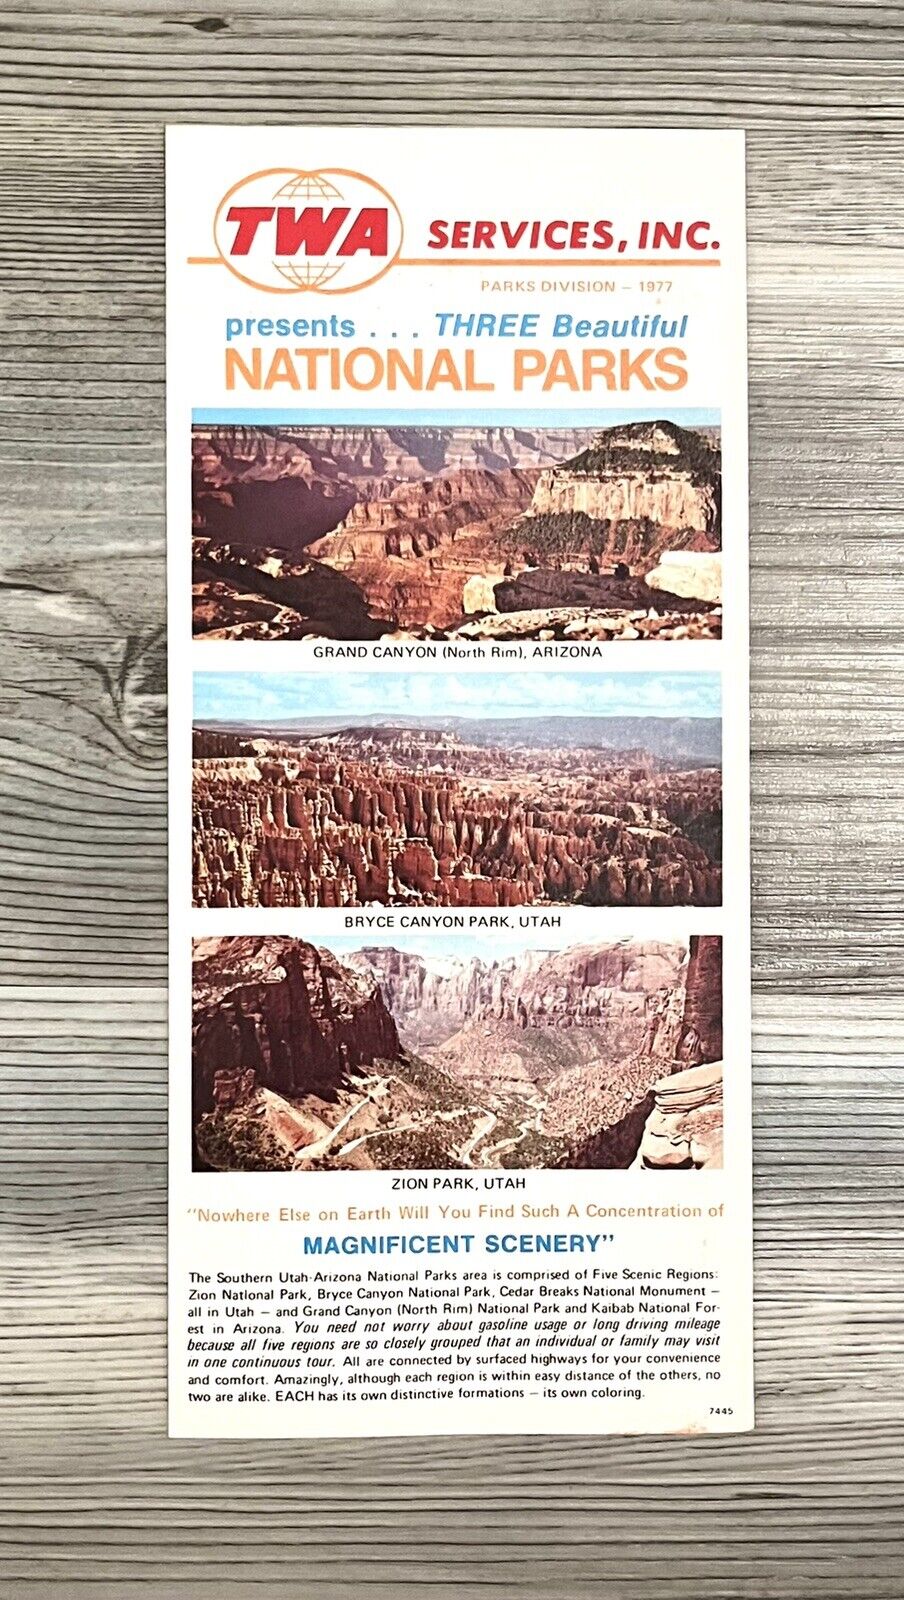 Vintage TWA Trans World Airlines National Parks Brochure Bryce Zion Grand Canyon